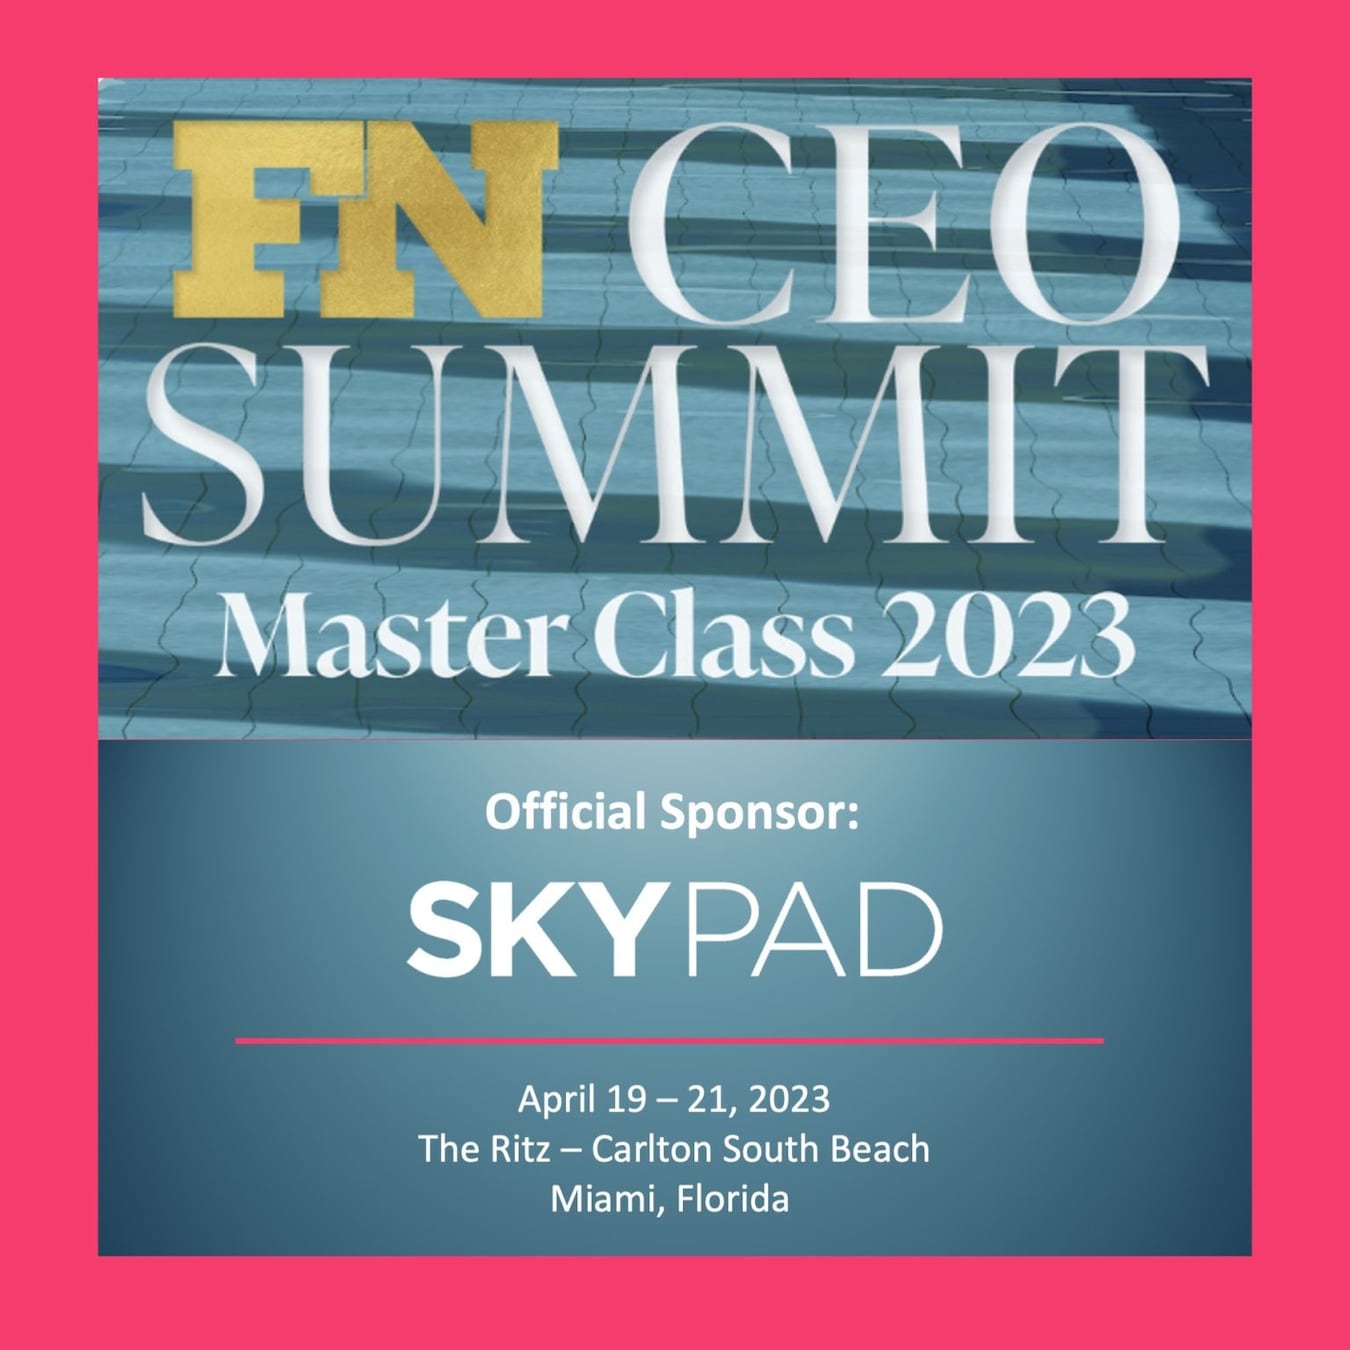 Project-FN CEO Summit Master Class 2023